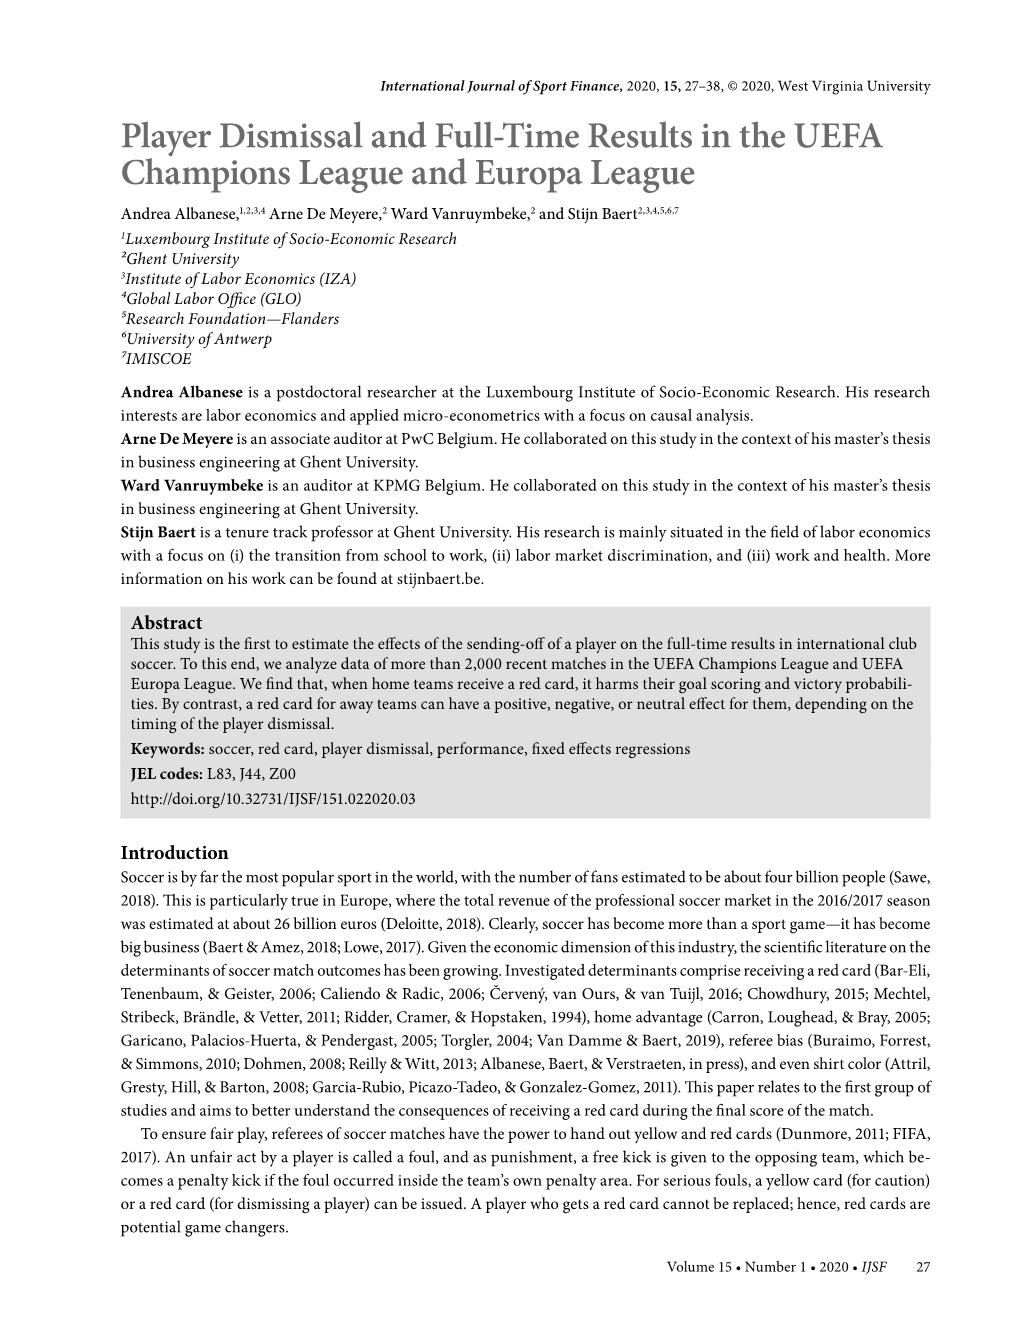 Player Dismissal and Full-Time Results in the UEFA Champions